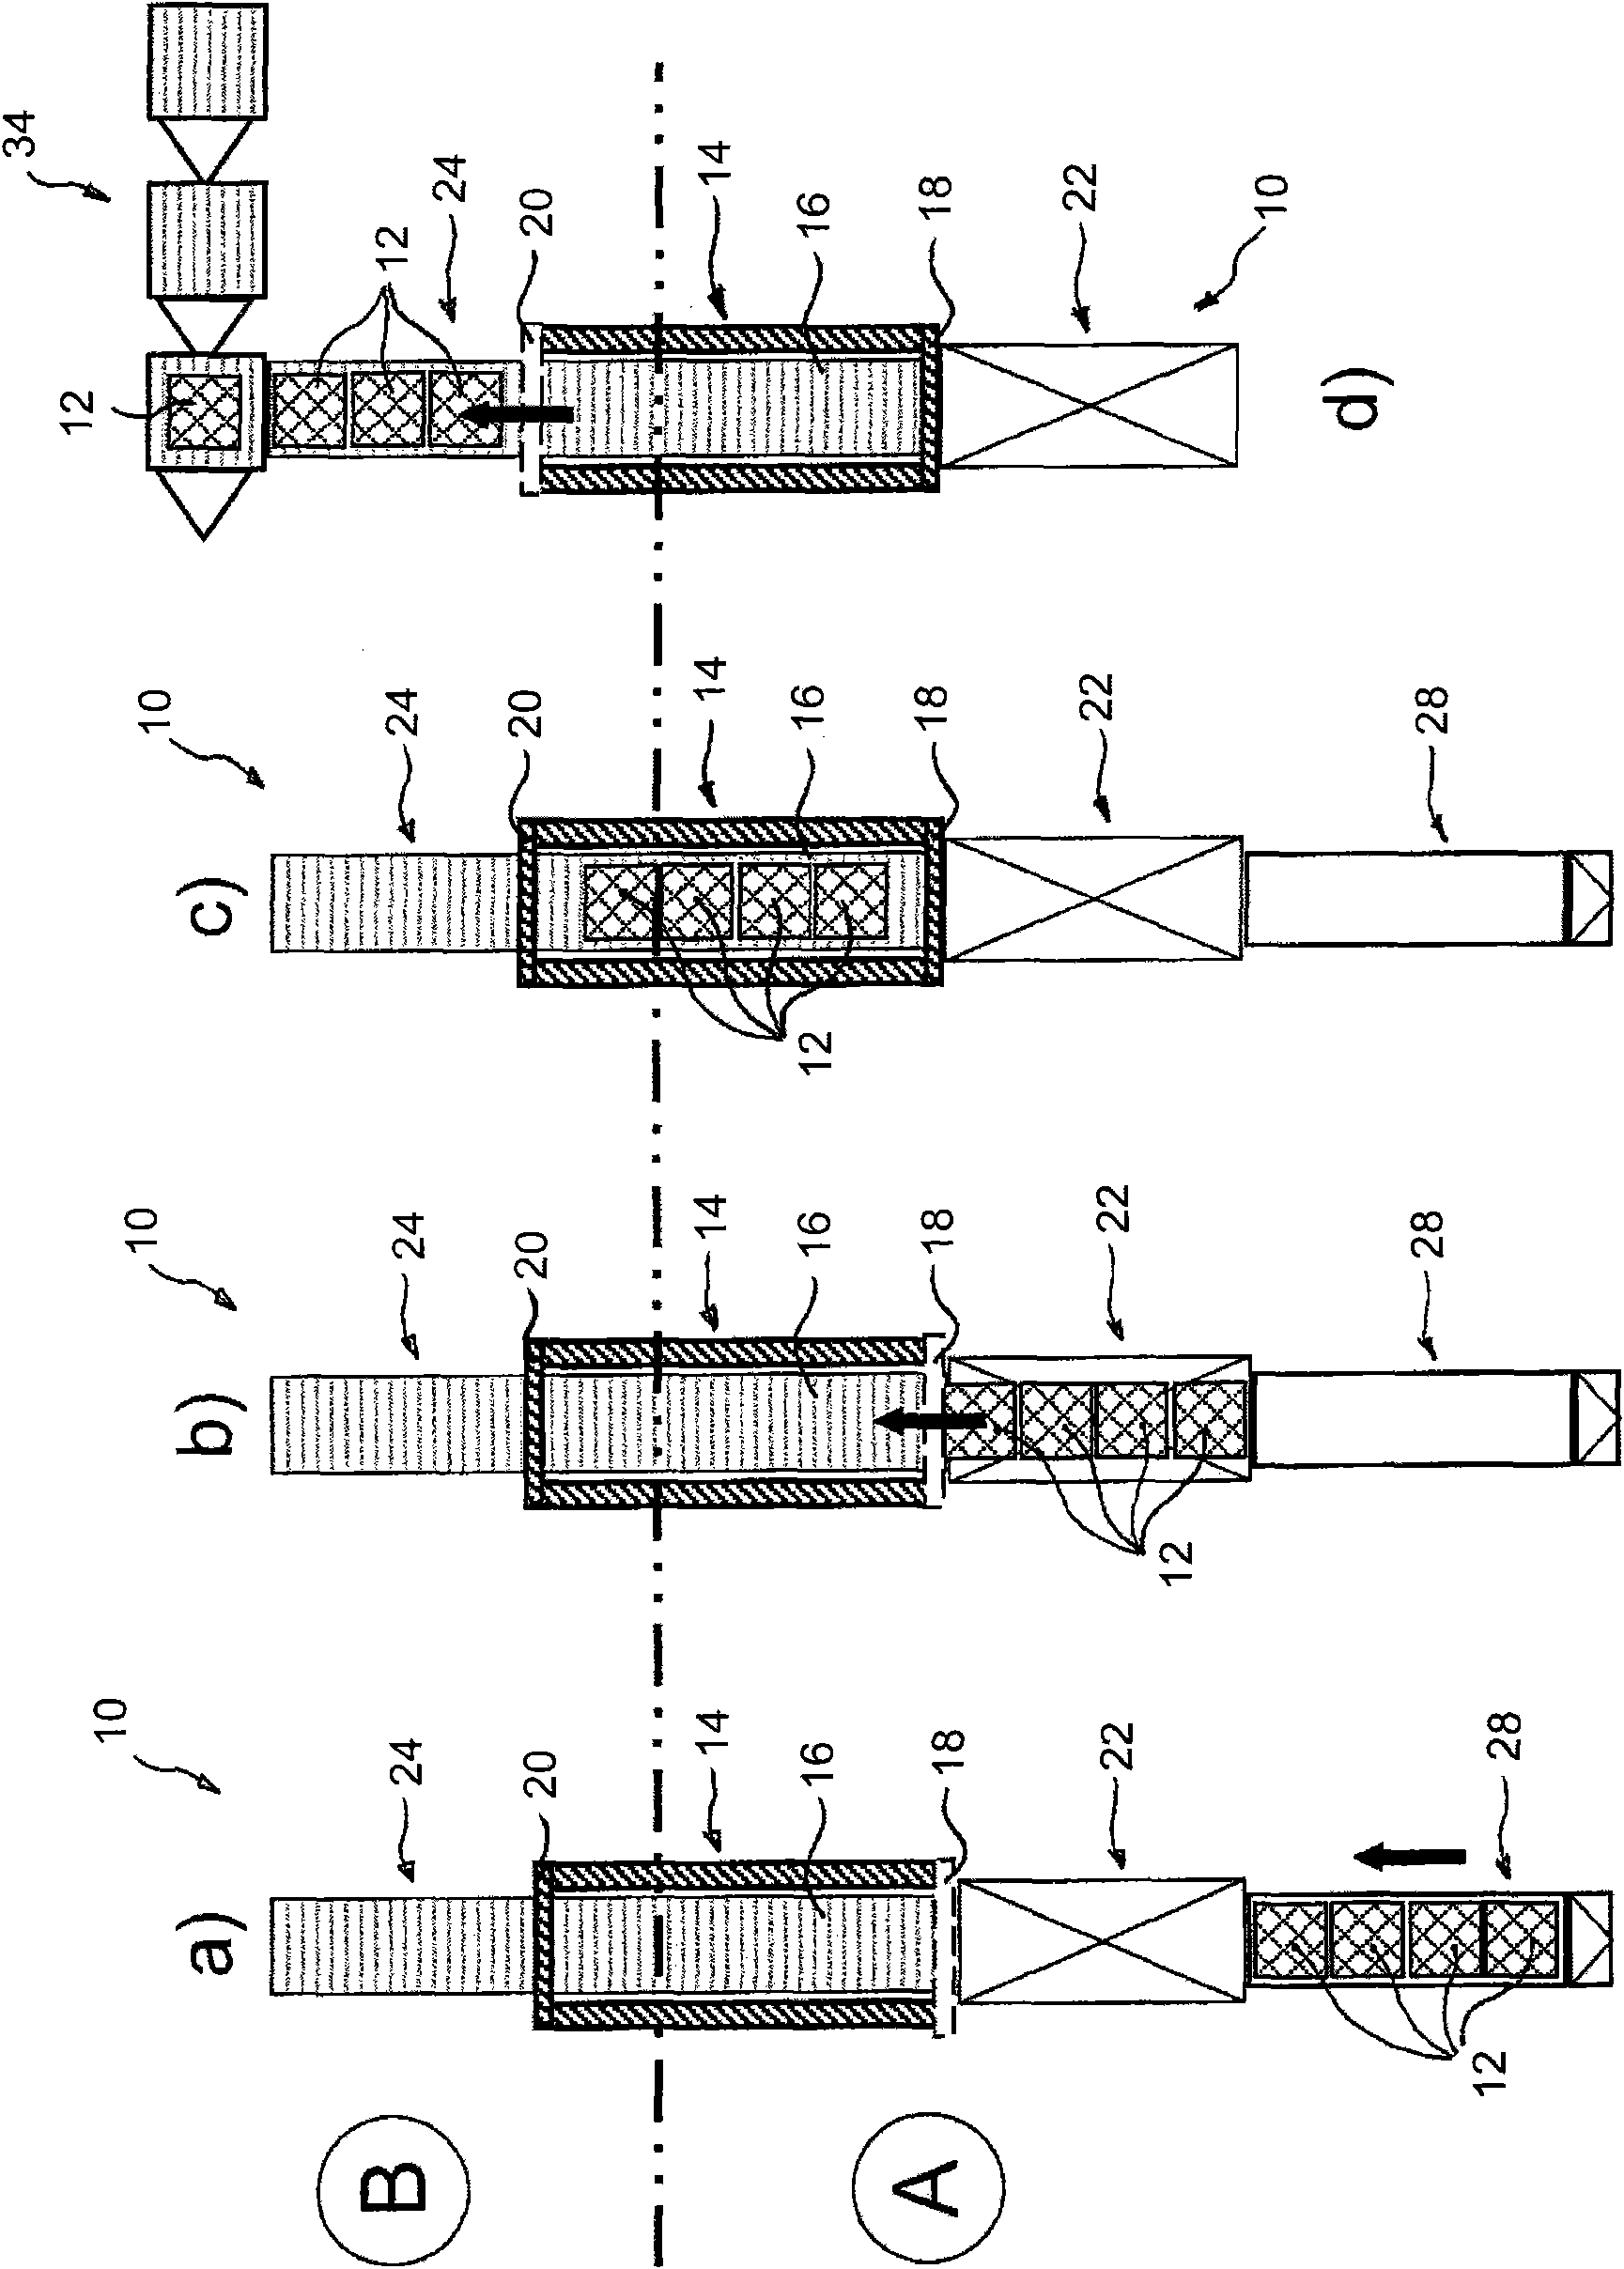 Method for transferring air cargo loading units, and transfer and screening system for carrying out said method